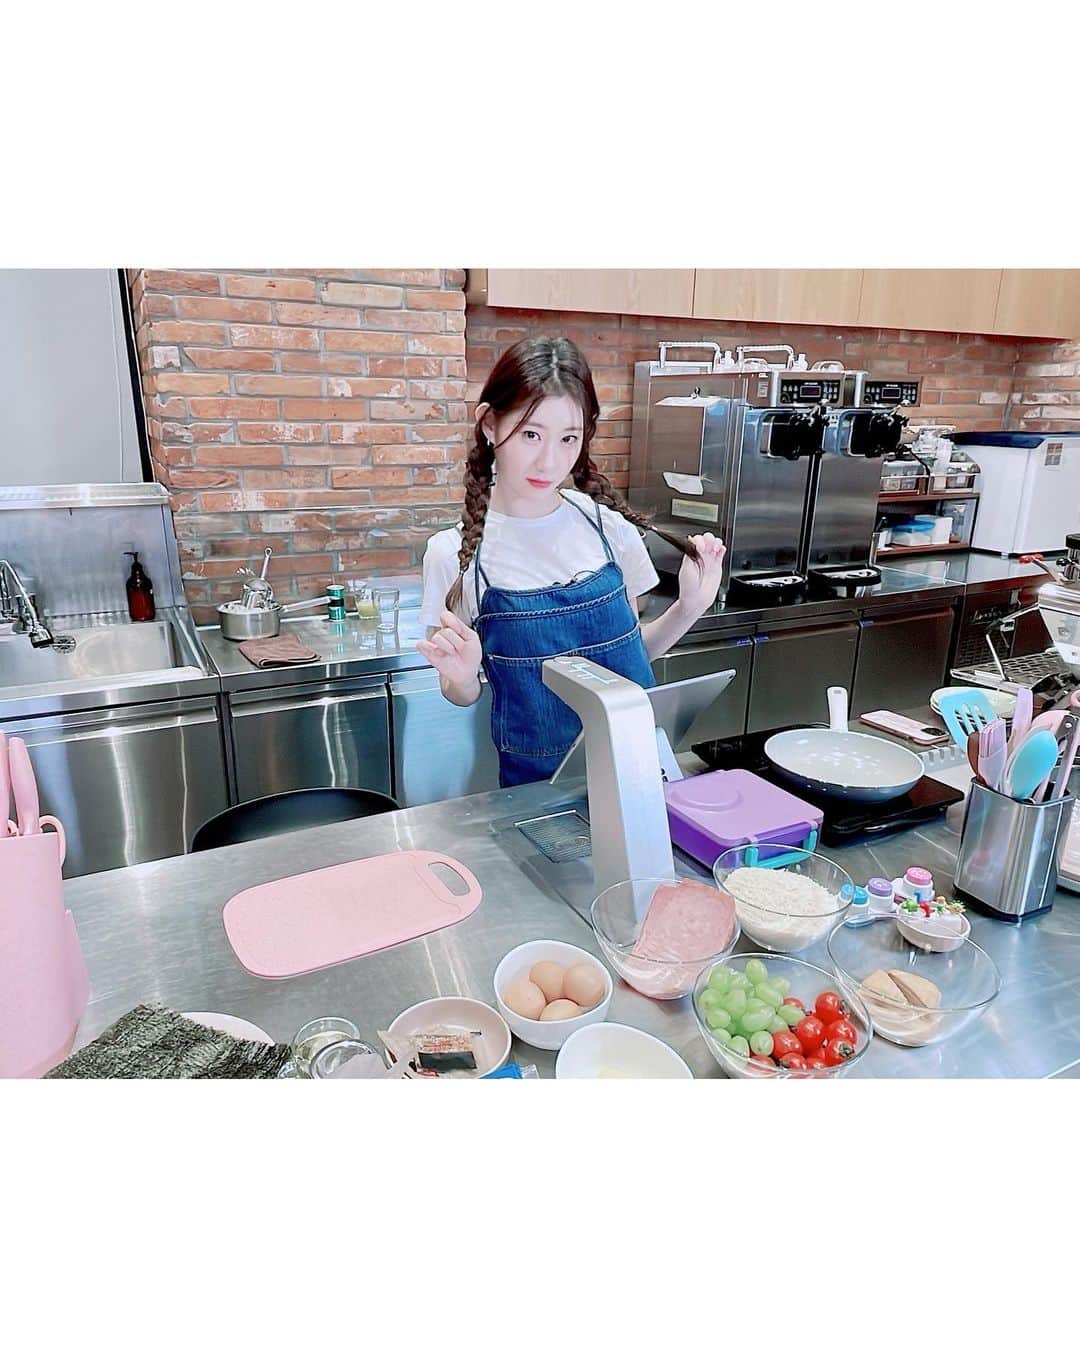 ITZYさんのインスタグラム写真 - (ITZYInstagram)「[🔴LIVE]   믿지의 사연 한 스푼을 담은 채령이의 일요식당! 오늘은 #챌봄박스  👊MISSION👊 믿지의 #챌봄박스 도전! MIDZY's #ChaelBOMBOXX challenge!  아래 해시태그와 함께 인증😎 Upload your BOMBOXX with hashtags below😎  #챌봄박스 #ChaelBOMBOXX  🍳Part 1 https://youtu.be/jRW8mtvNHD8 🍳Part 2 https://youtu.be/DazD5XyobrE  #챌봄박스 레시피  1. 테두리 자른 식빵 준비!🍞 2. 식빵 위에 딸기잼&치즈&햄 얹고 식빵 덮덮X2!🍓🧀 3. 계란물, 빵가루 묻혀 약불에 잘 구워주면 몬테크리스토 끝🥪 4. 밥에 단촛물로 간하여 유부에 넣어 유부초밥도 꾹꾹🍚💕 5. 좋아하는 과일과 함께 예쁘게 도시락에 담으면 완성🍱  Recipe for #ChaelBOMBOXX  1. Prepare bread with the edges cut!🍞 2. Strawberry jam&cheese&ham between breads!🍓🧀 3. Cover with bread crumbs after dipping in stirred egg, and toast it! 4. Fill Yubu with seasoned rice🍚💕 5. Put everything in the box with favorite fruits!  #쩝쩝박사_있지가_믿지에게 #요란요란 #EATZY」5月8日 19時47分 - itzy.all.in.us